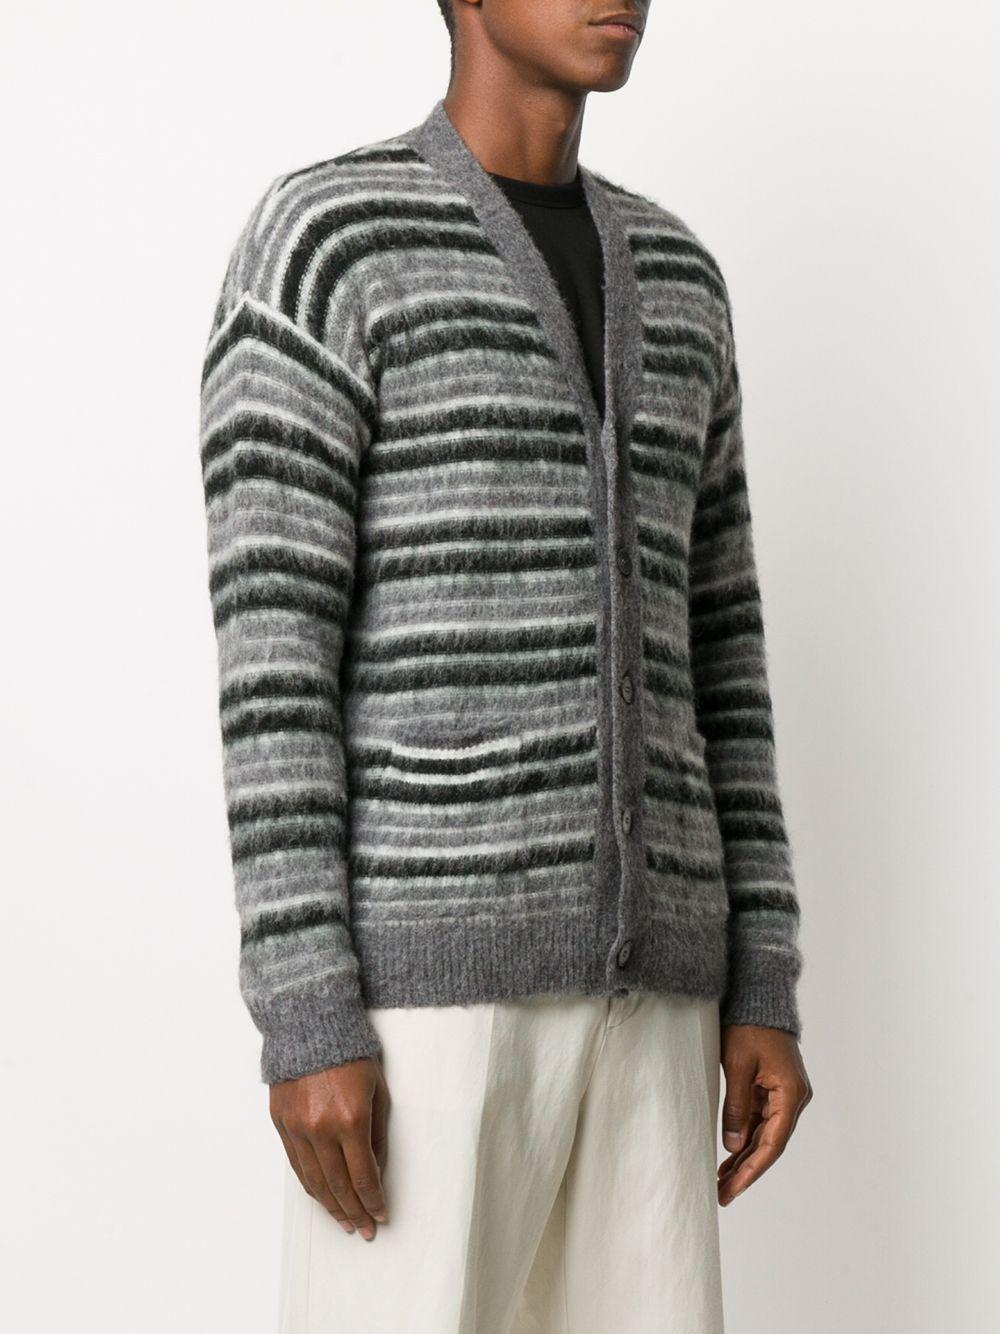 Roberto Collina Wool Striped Knit Cardigan in Grey (Gray) for Men - Lyst